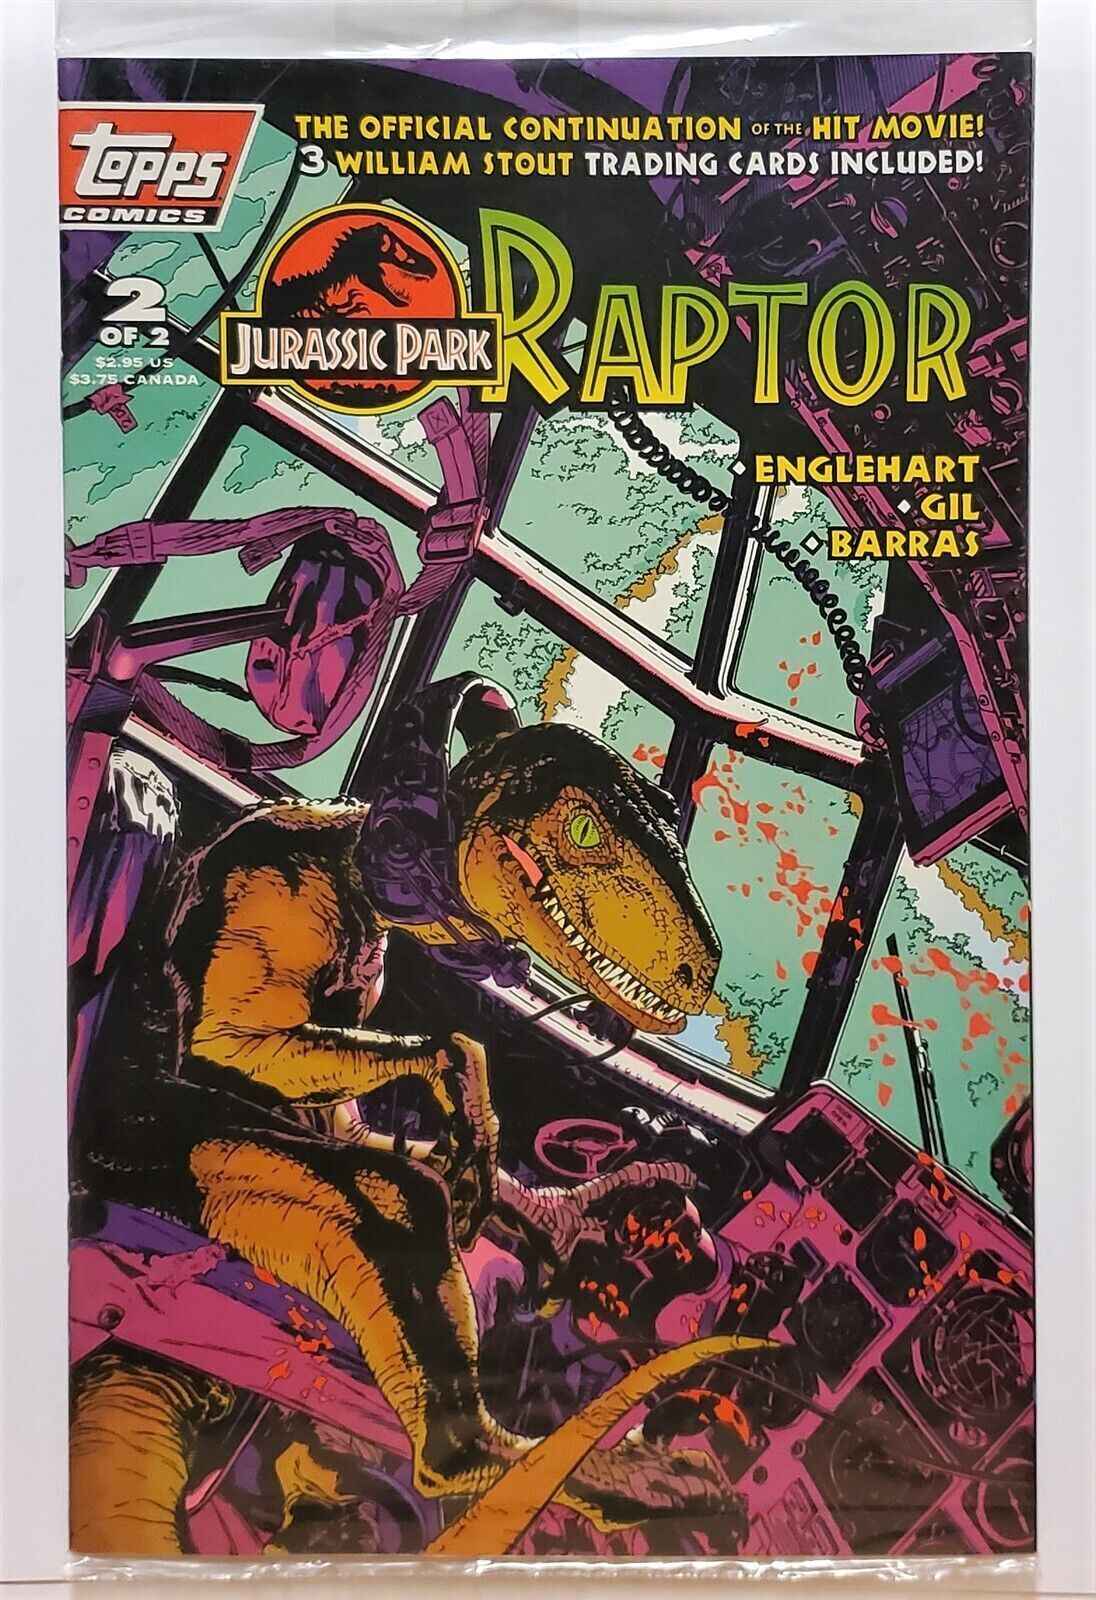 Jurassic Park: Raptor #2 (with card) VF/NM; Topps | we combine shipping